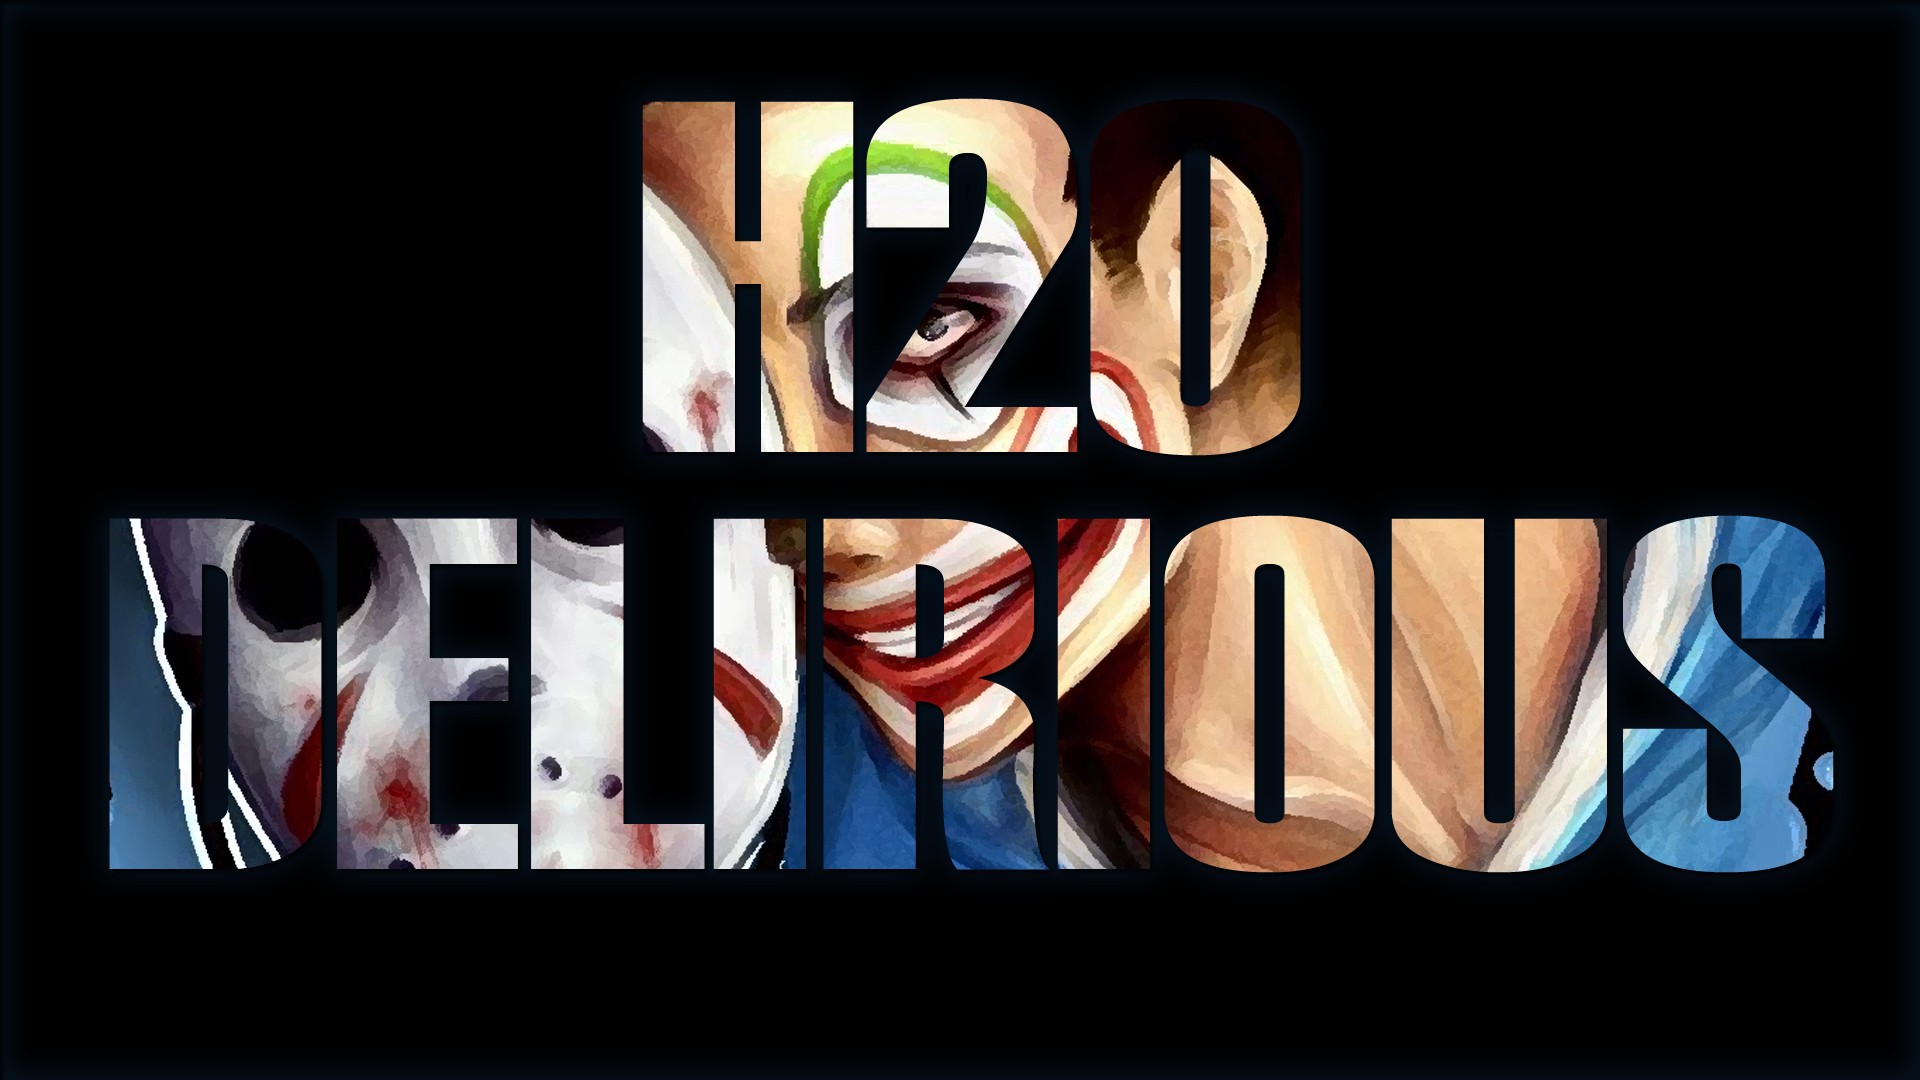 General 1920x1080 H2O clown YouTube simple background black background typography